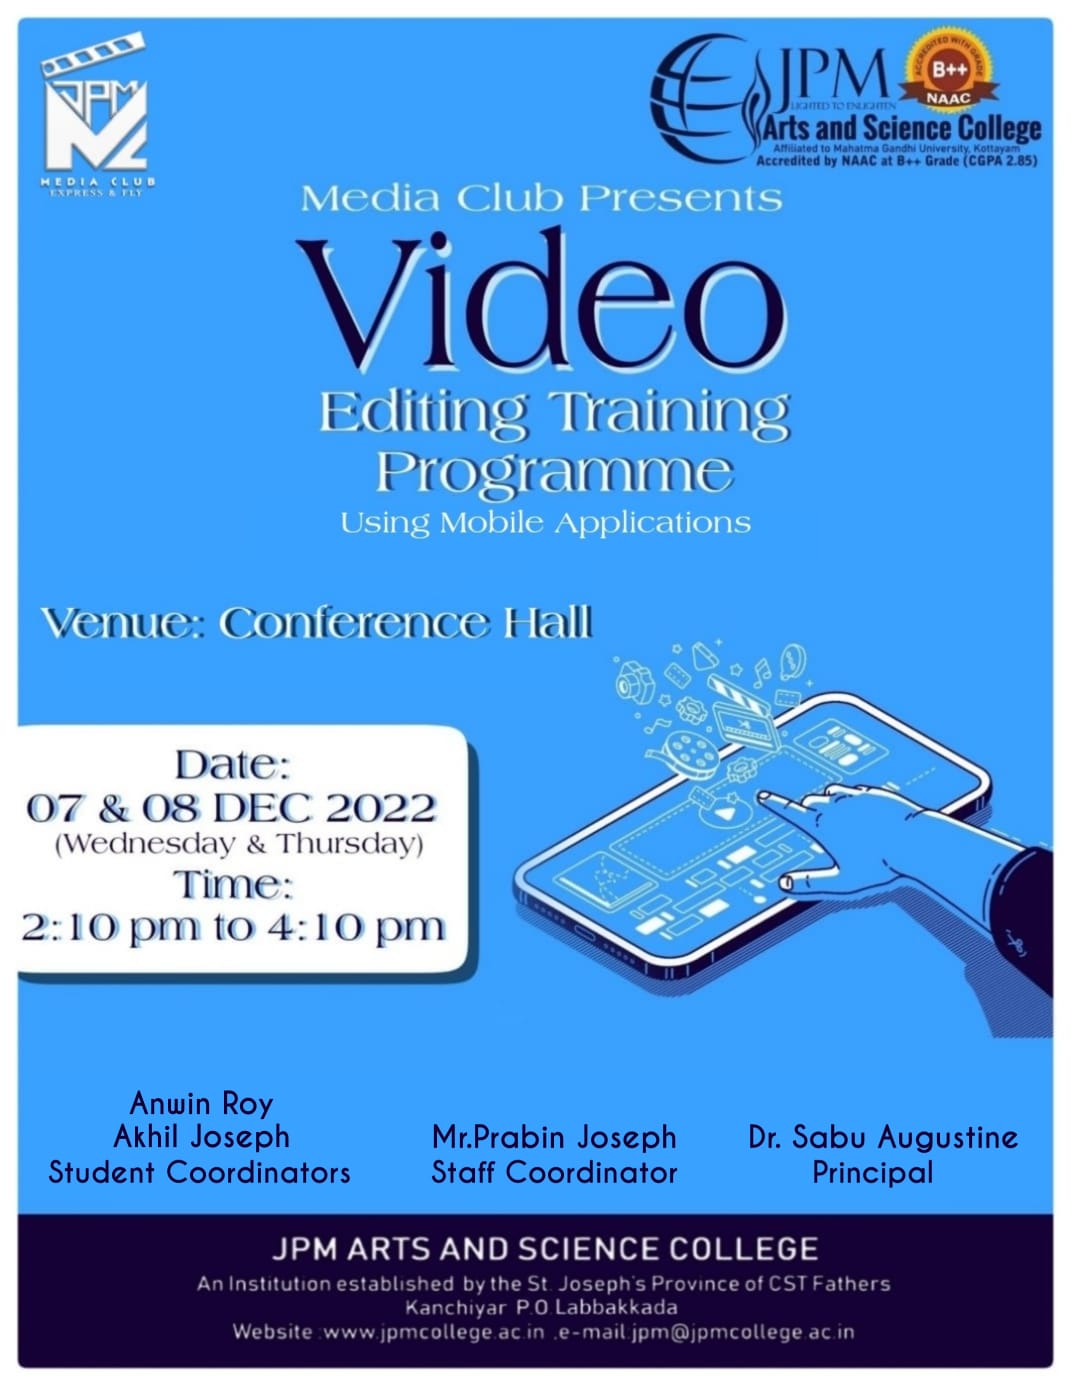 Video Editing Training Programme using Mobile Applications